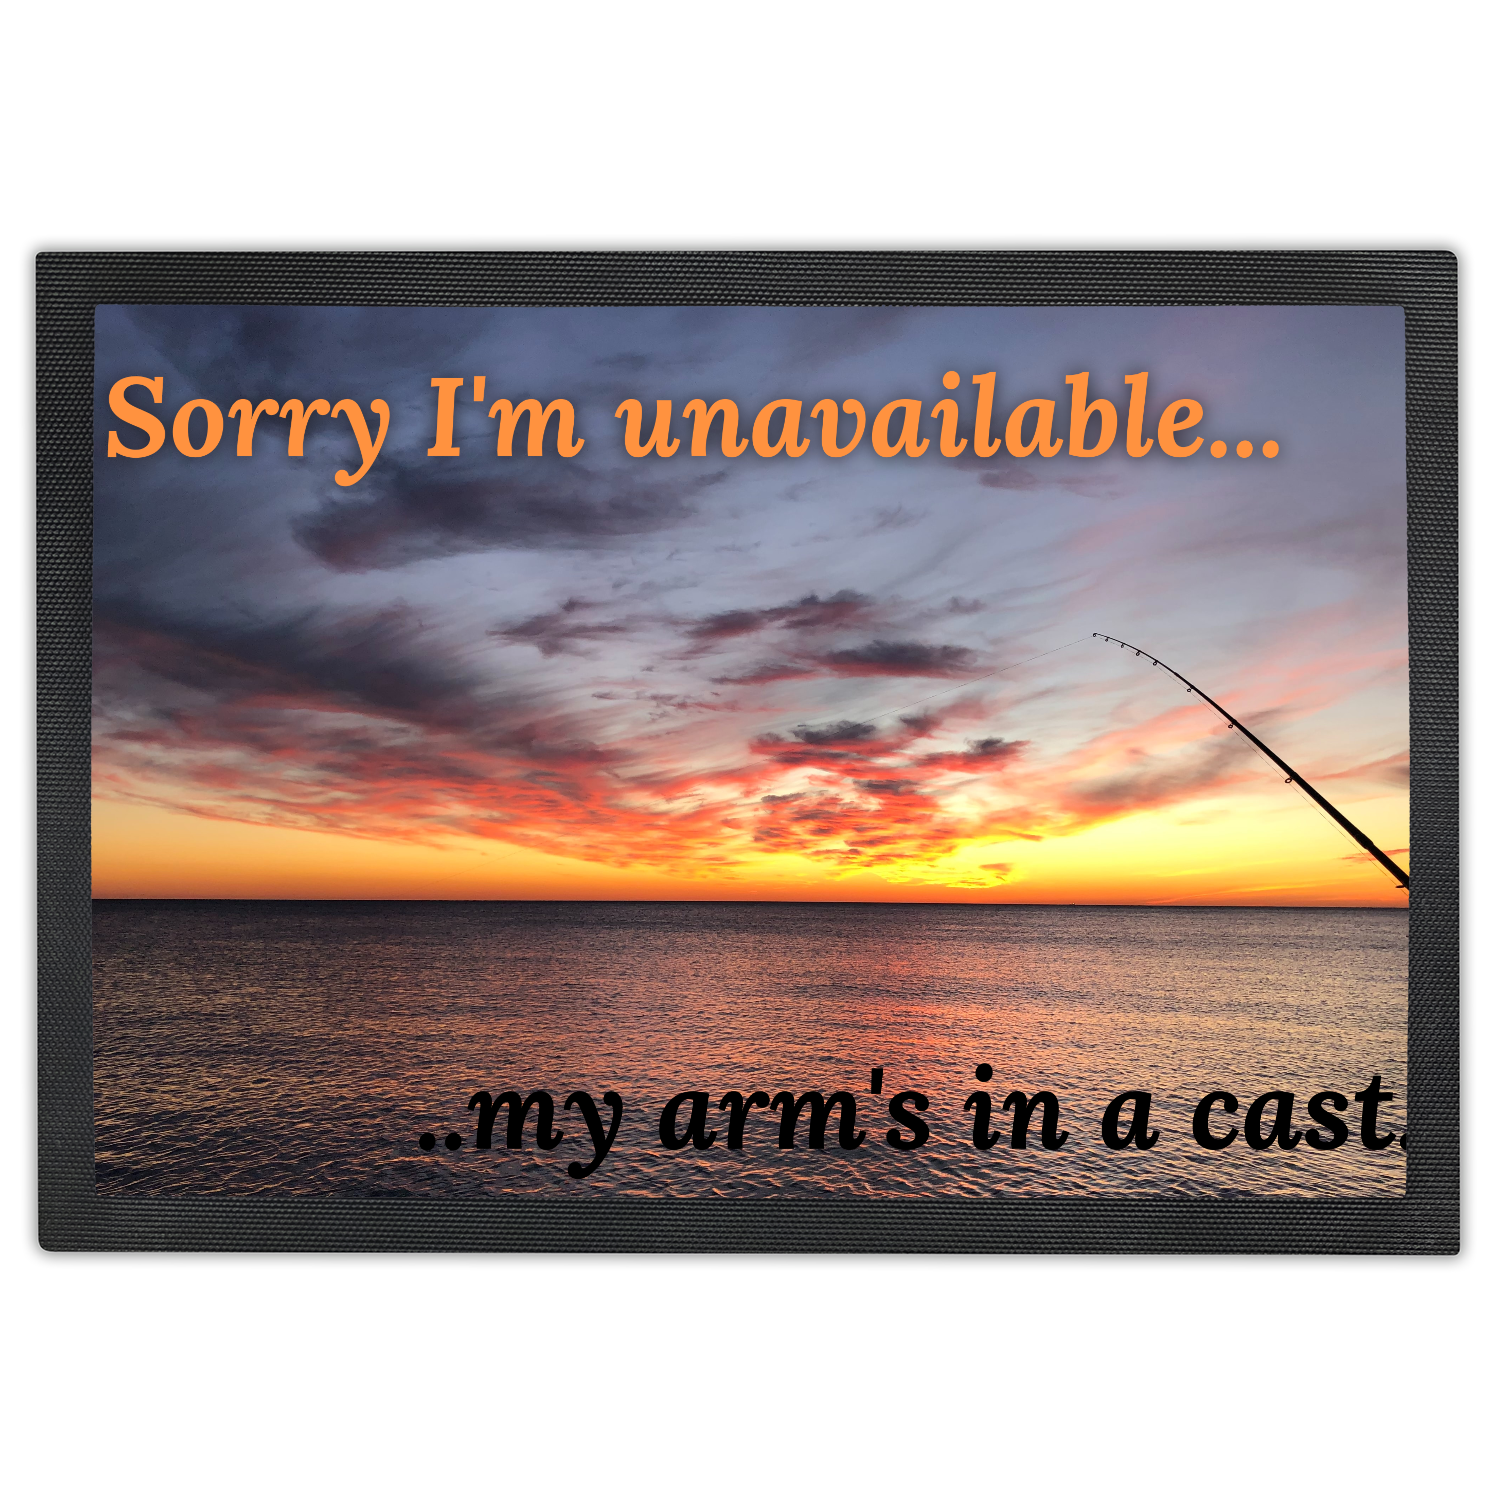 Sorry I'm unavailable, my arm's in a cast. Fisherman's Doormat